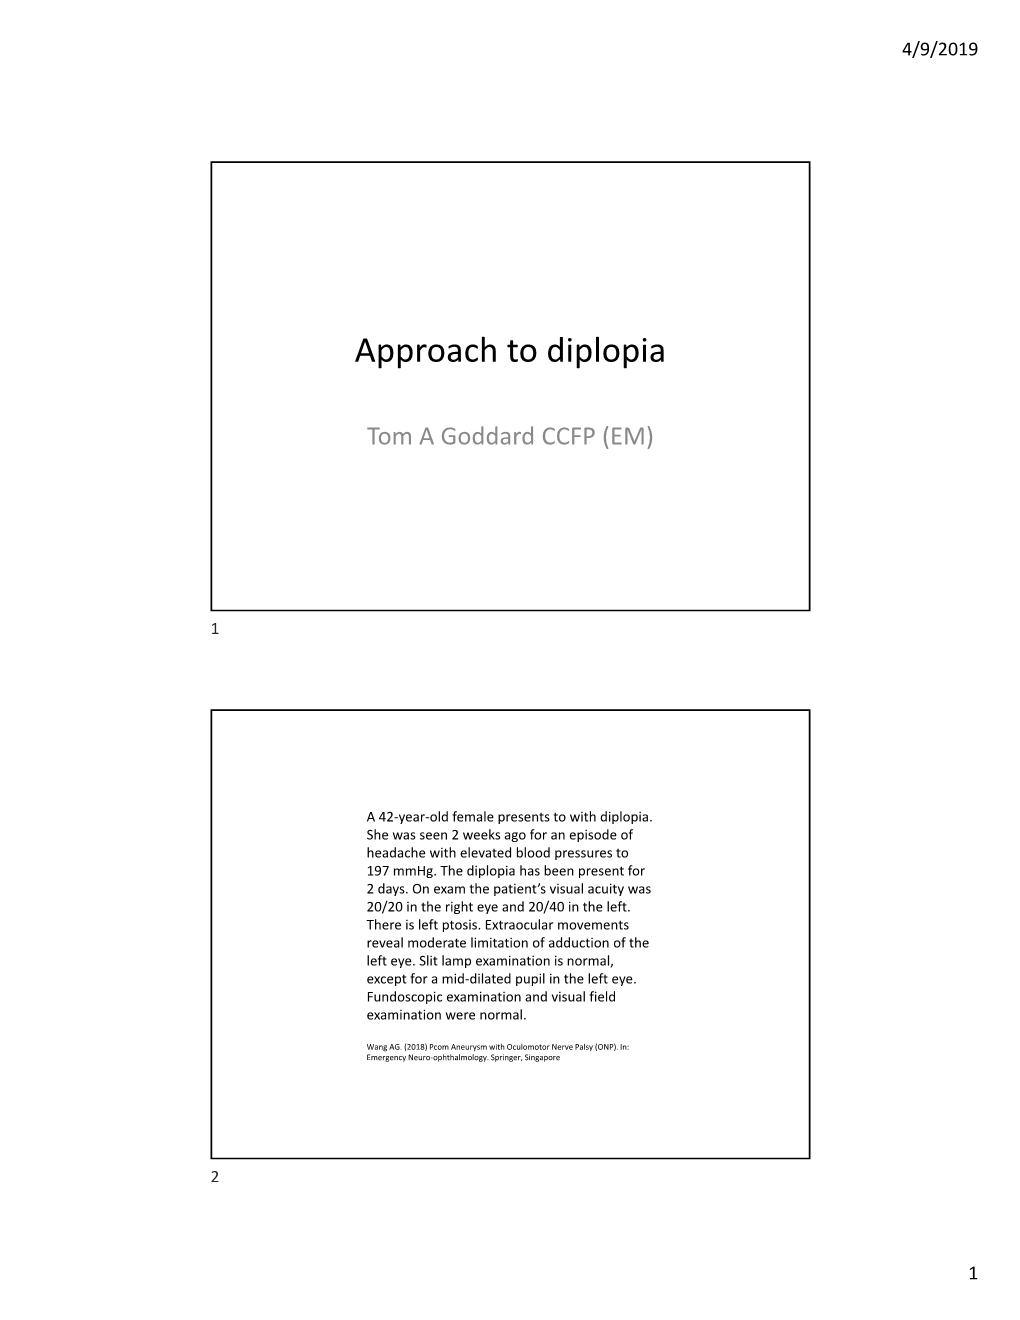 Approach to Diplopia